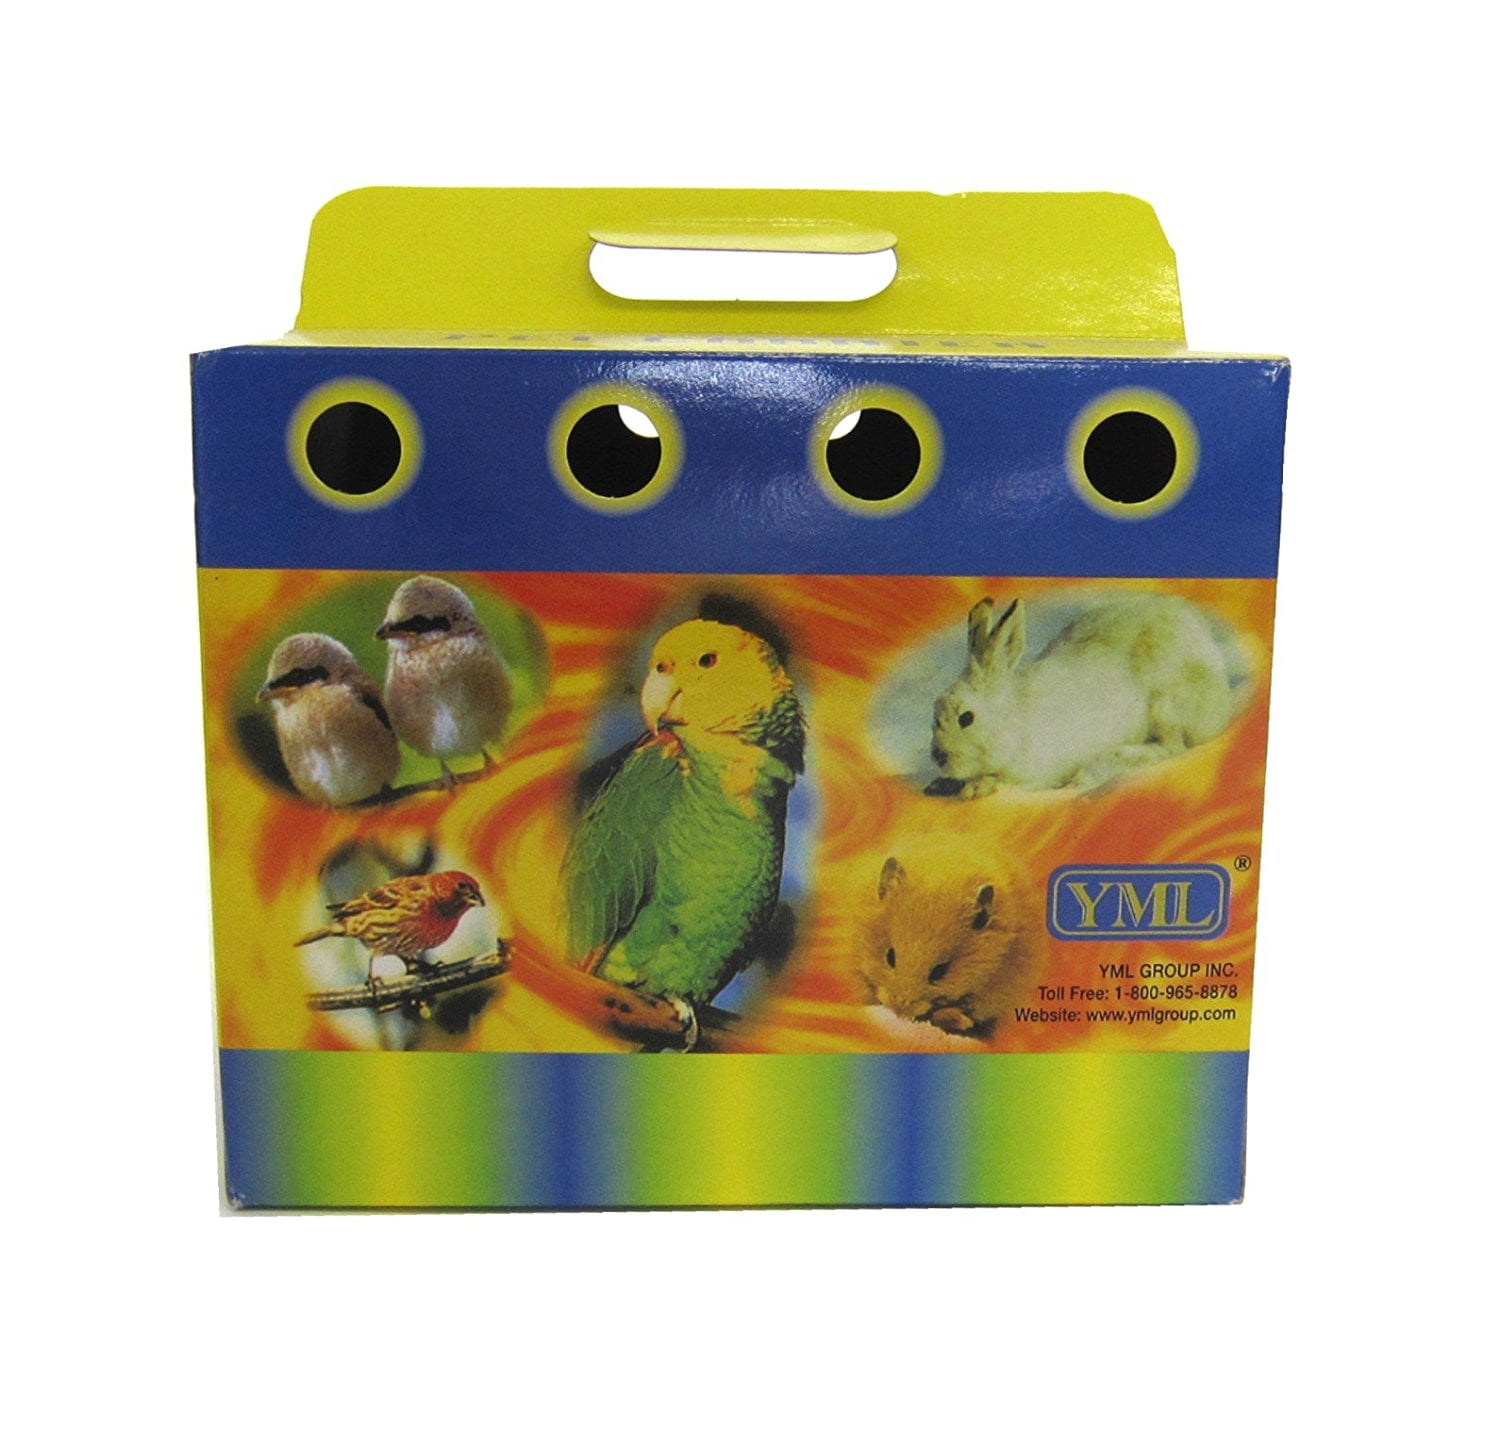 Lot of 5 YML Travel Box for Small Animals 